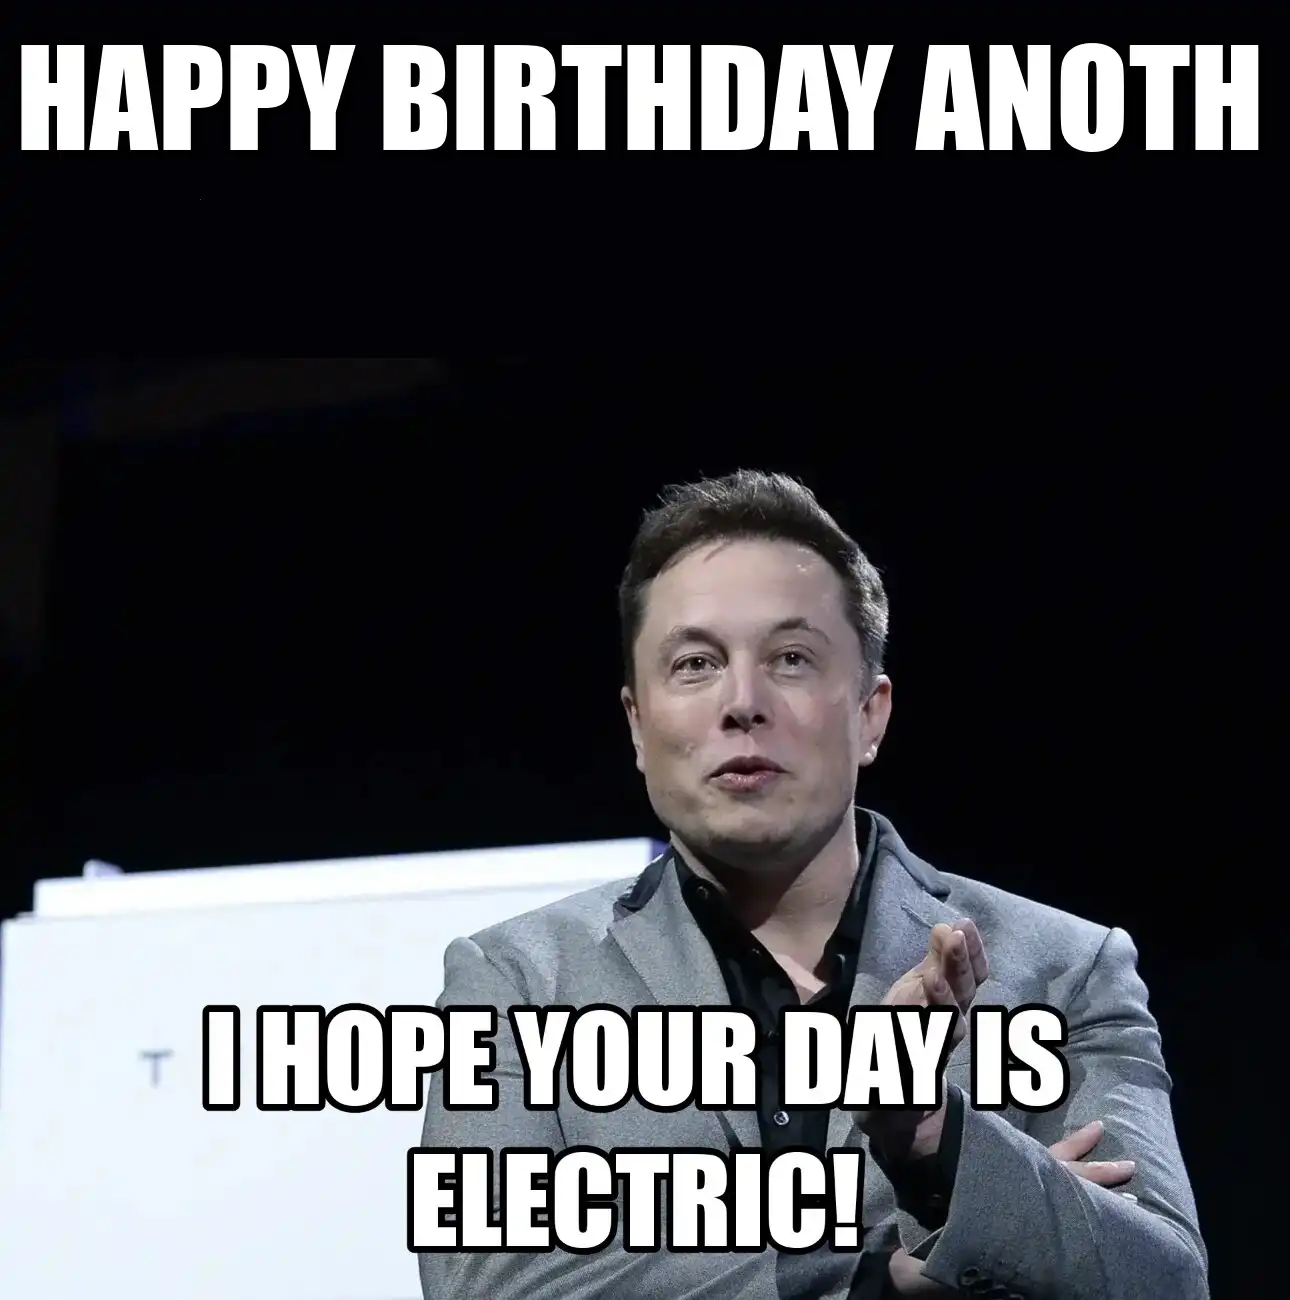 Happy Birthday Anoth I Hope Your Day Is Electric Meme